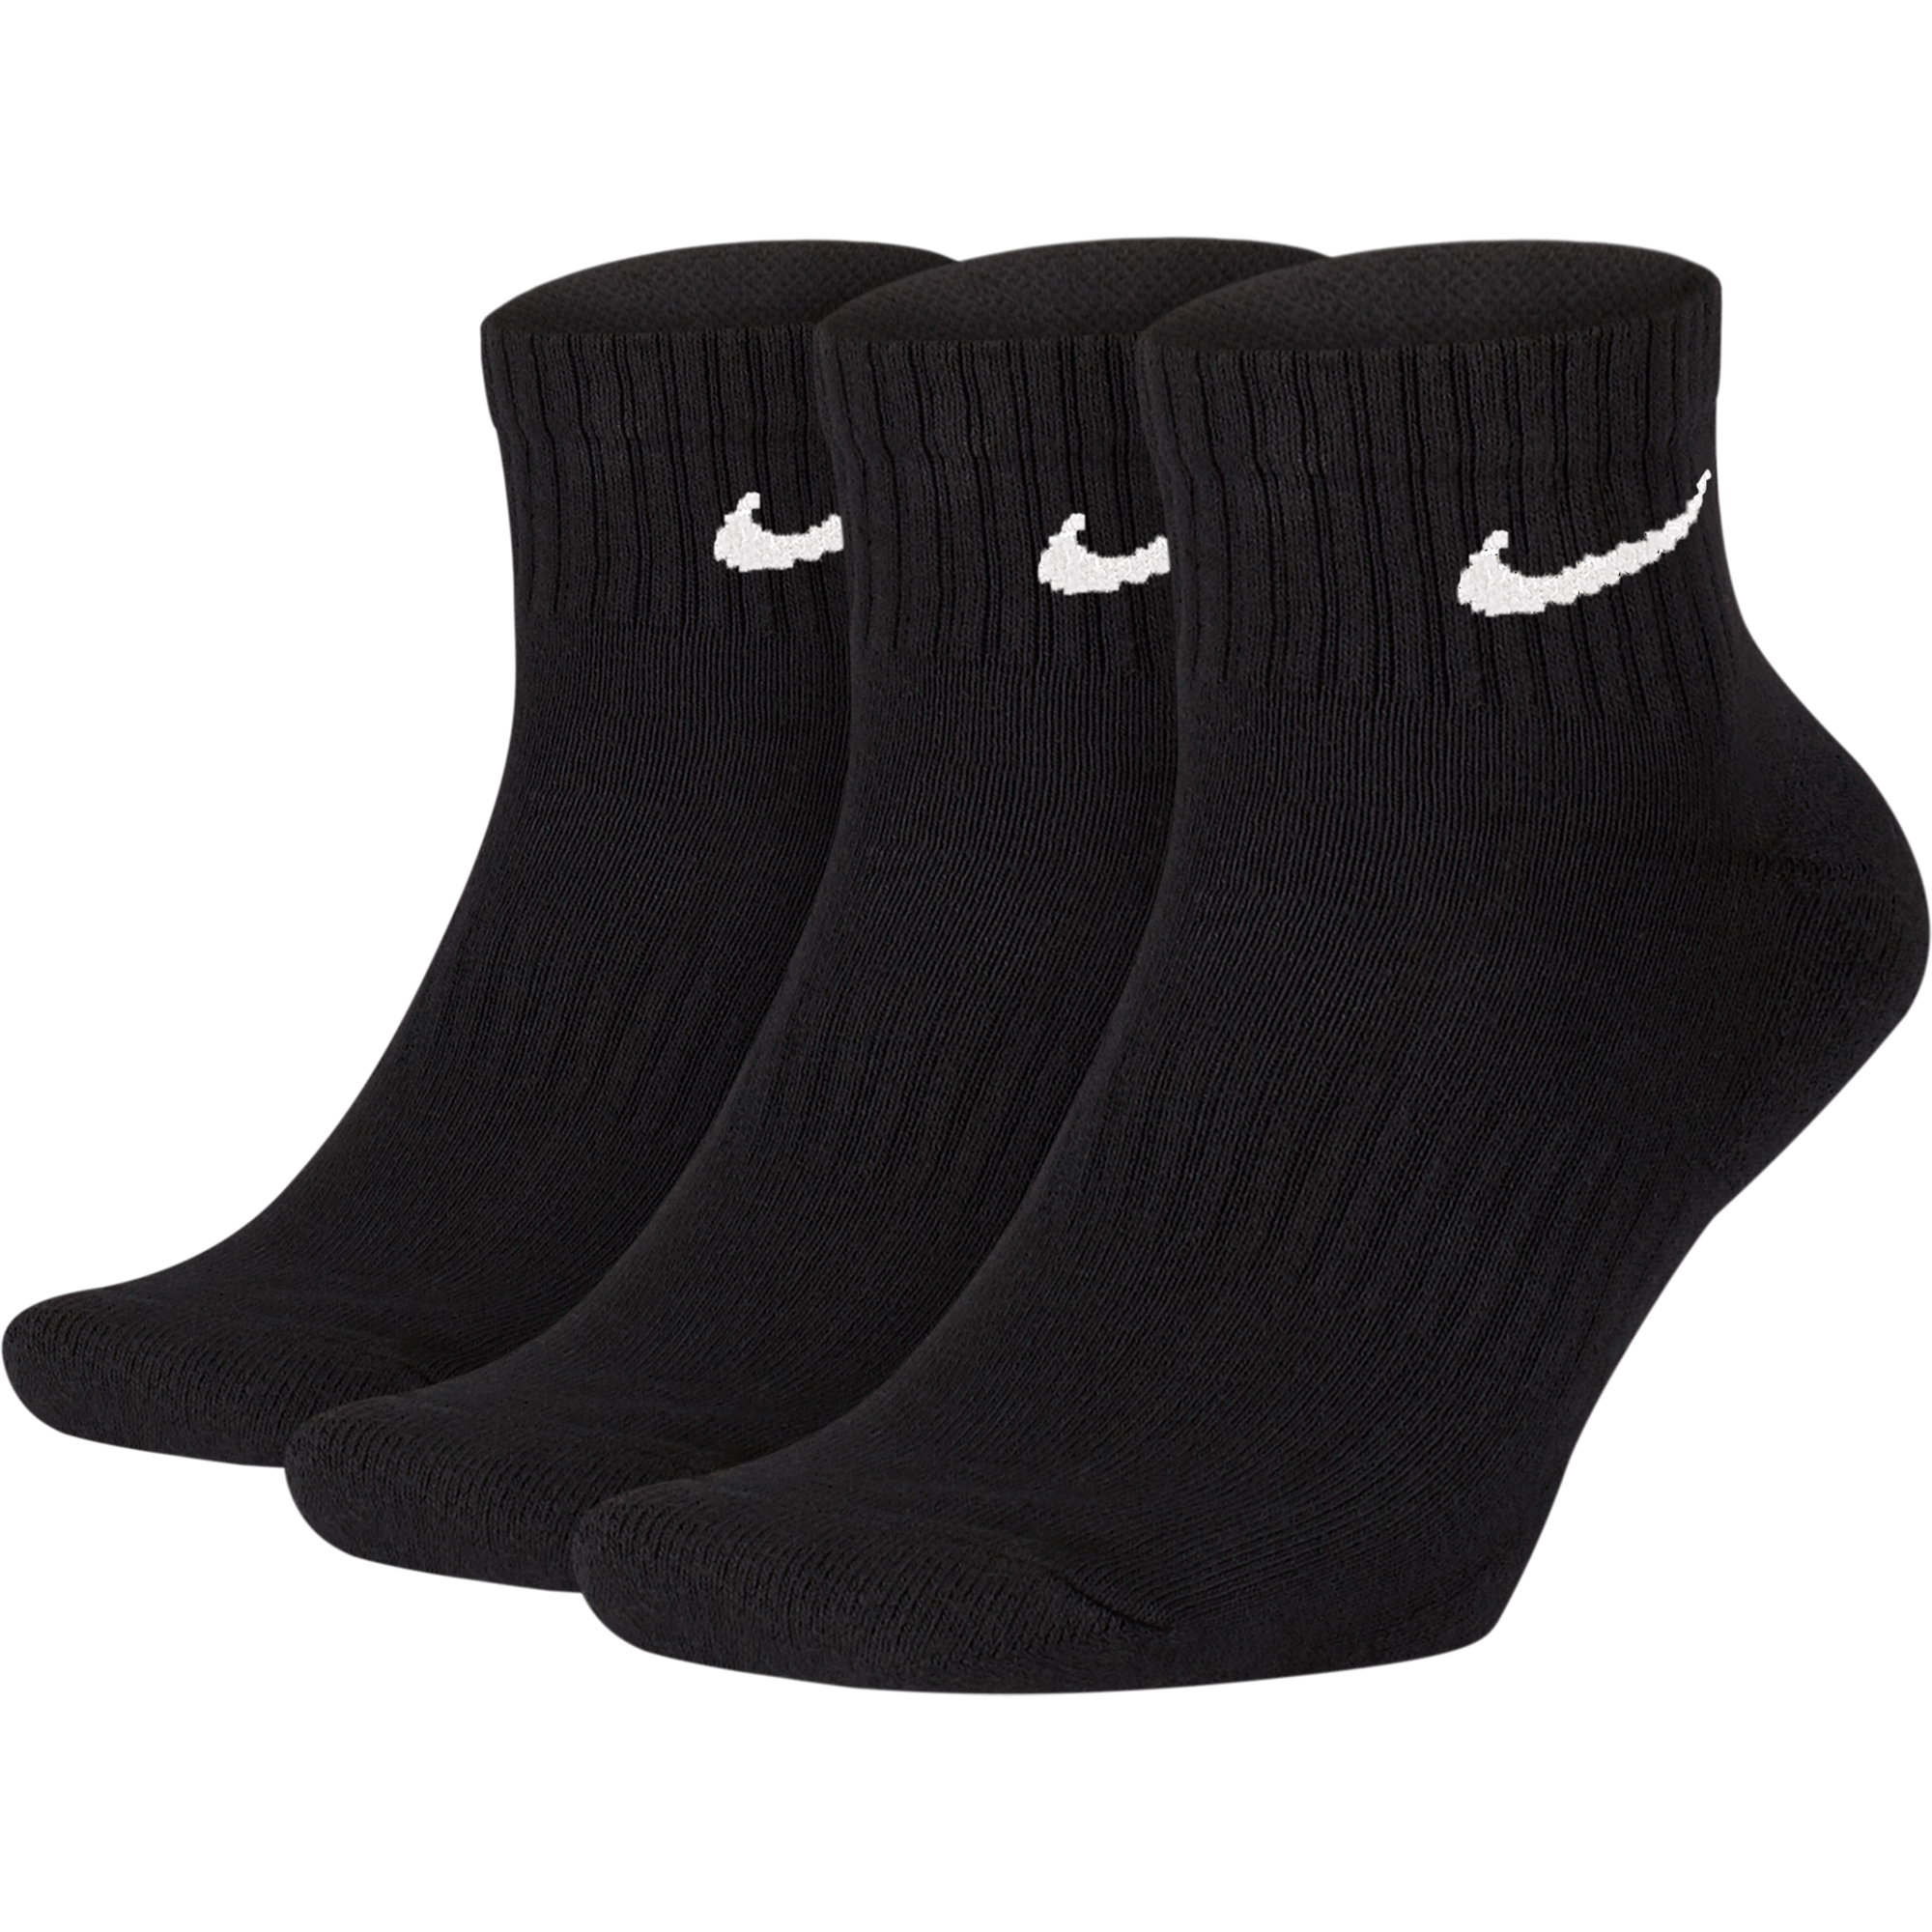 Nike - M's Everyday Cushion Ankle 3ppk